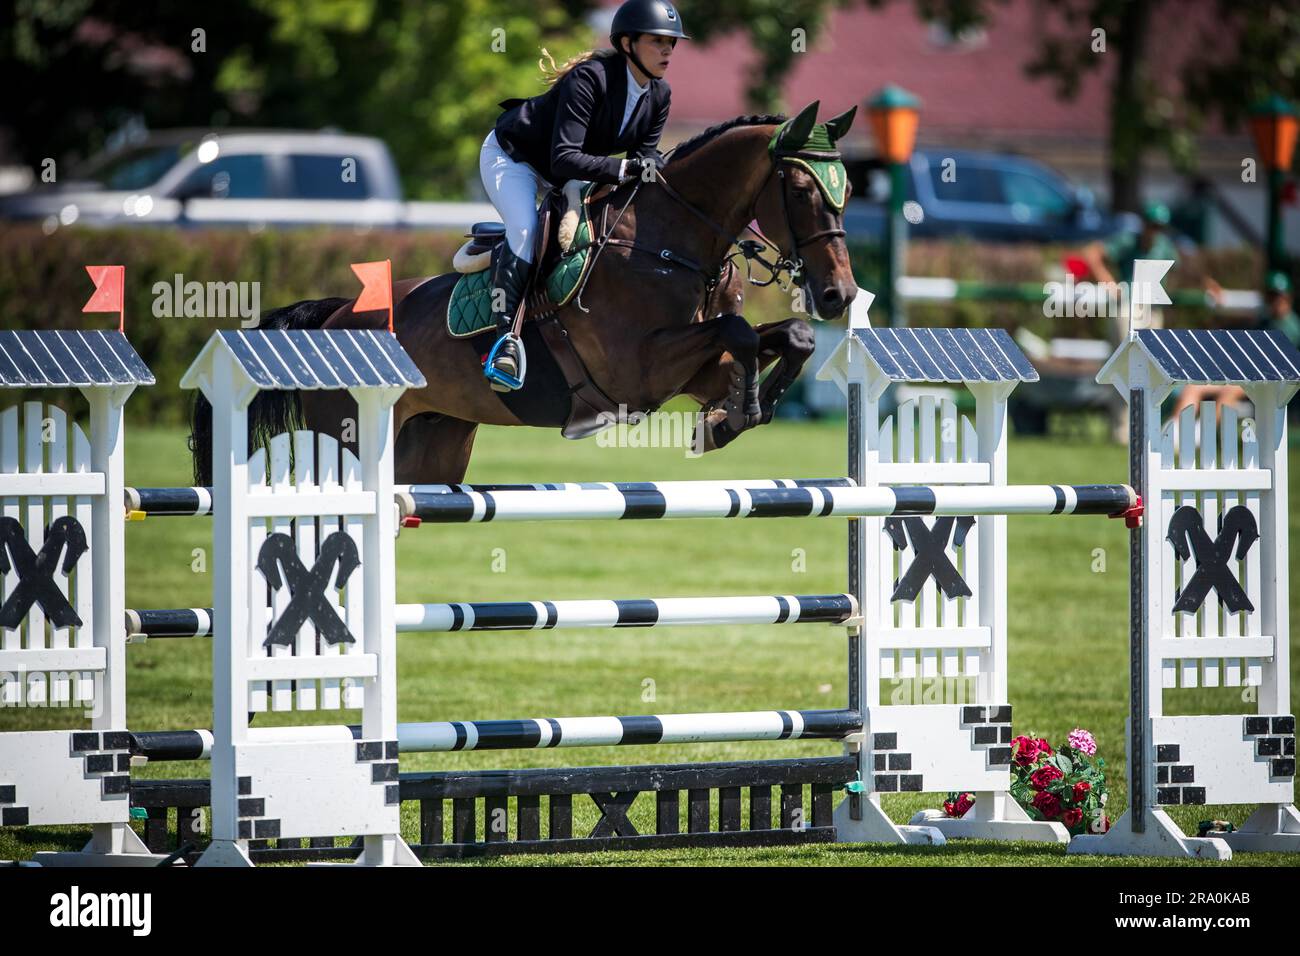 Florencia Vega of Mexico competing at the Pan American Show at Spruce Meadows in Calgary, Alberta, Canada on June 29, 2023. Stock Photo